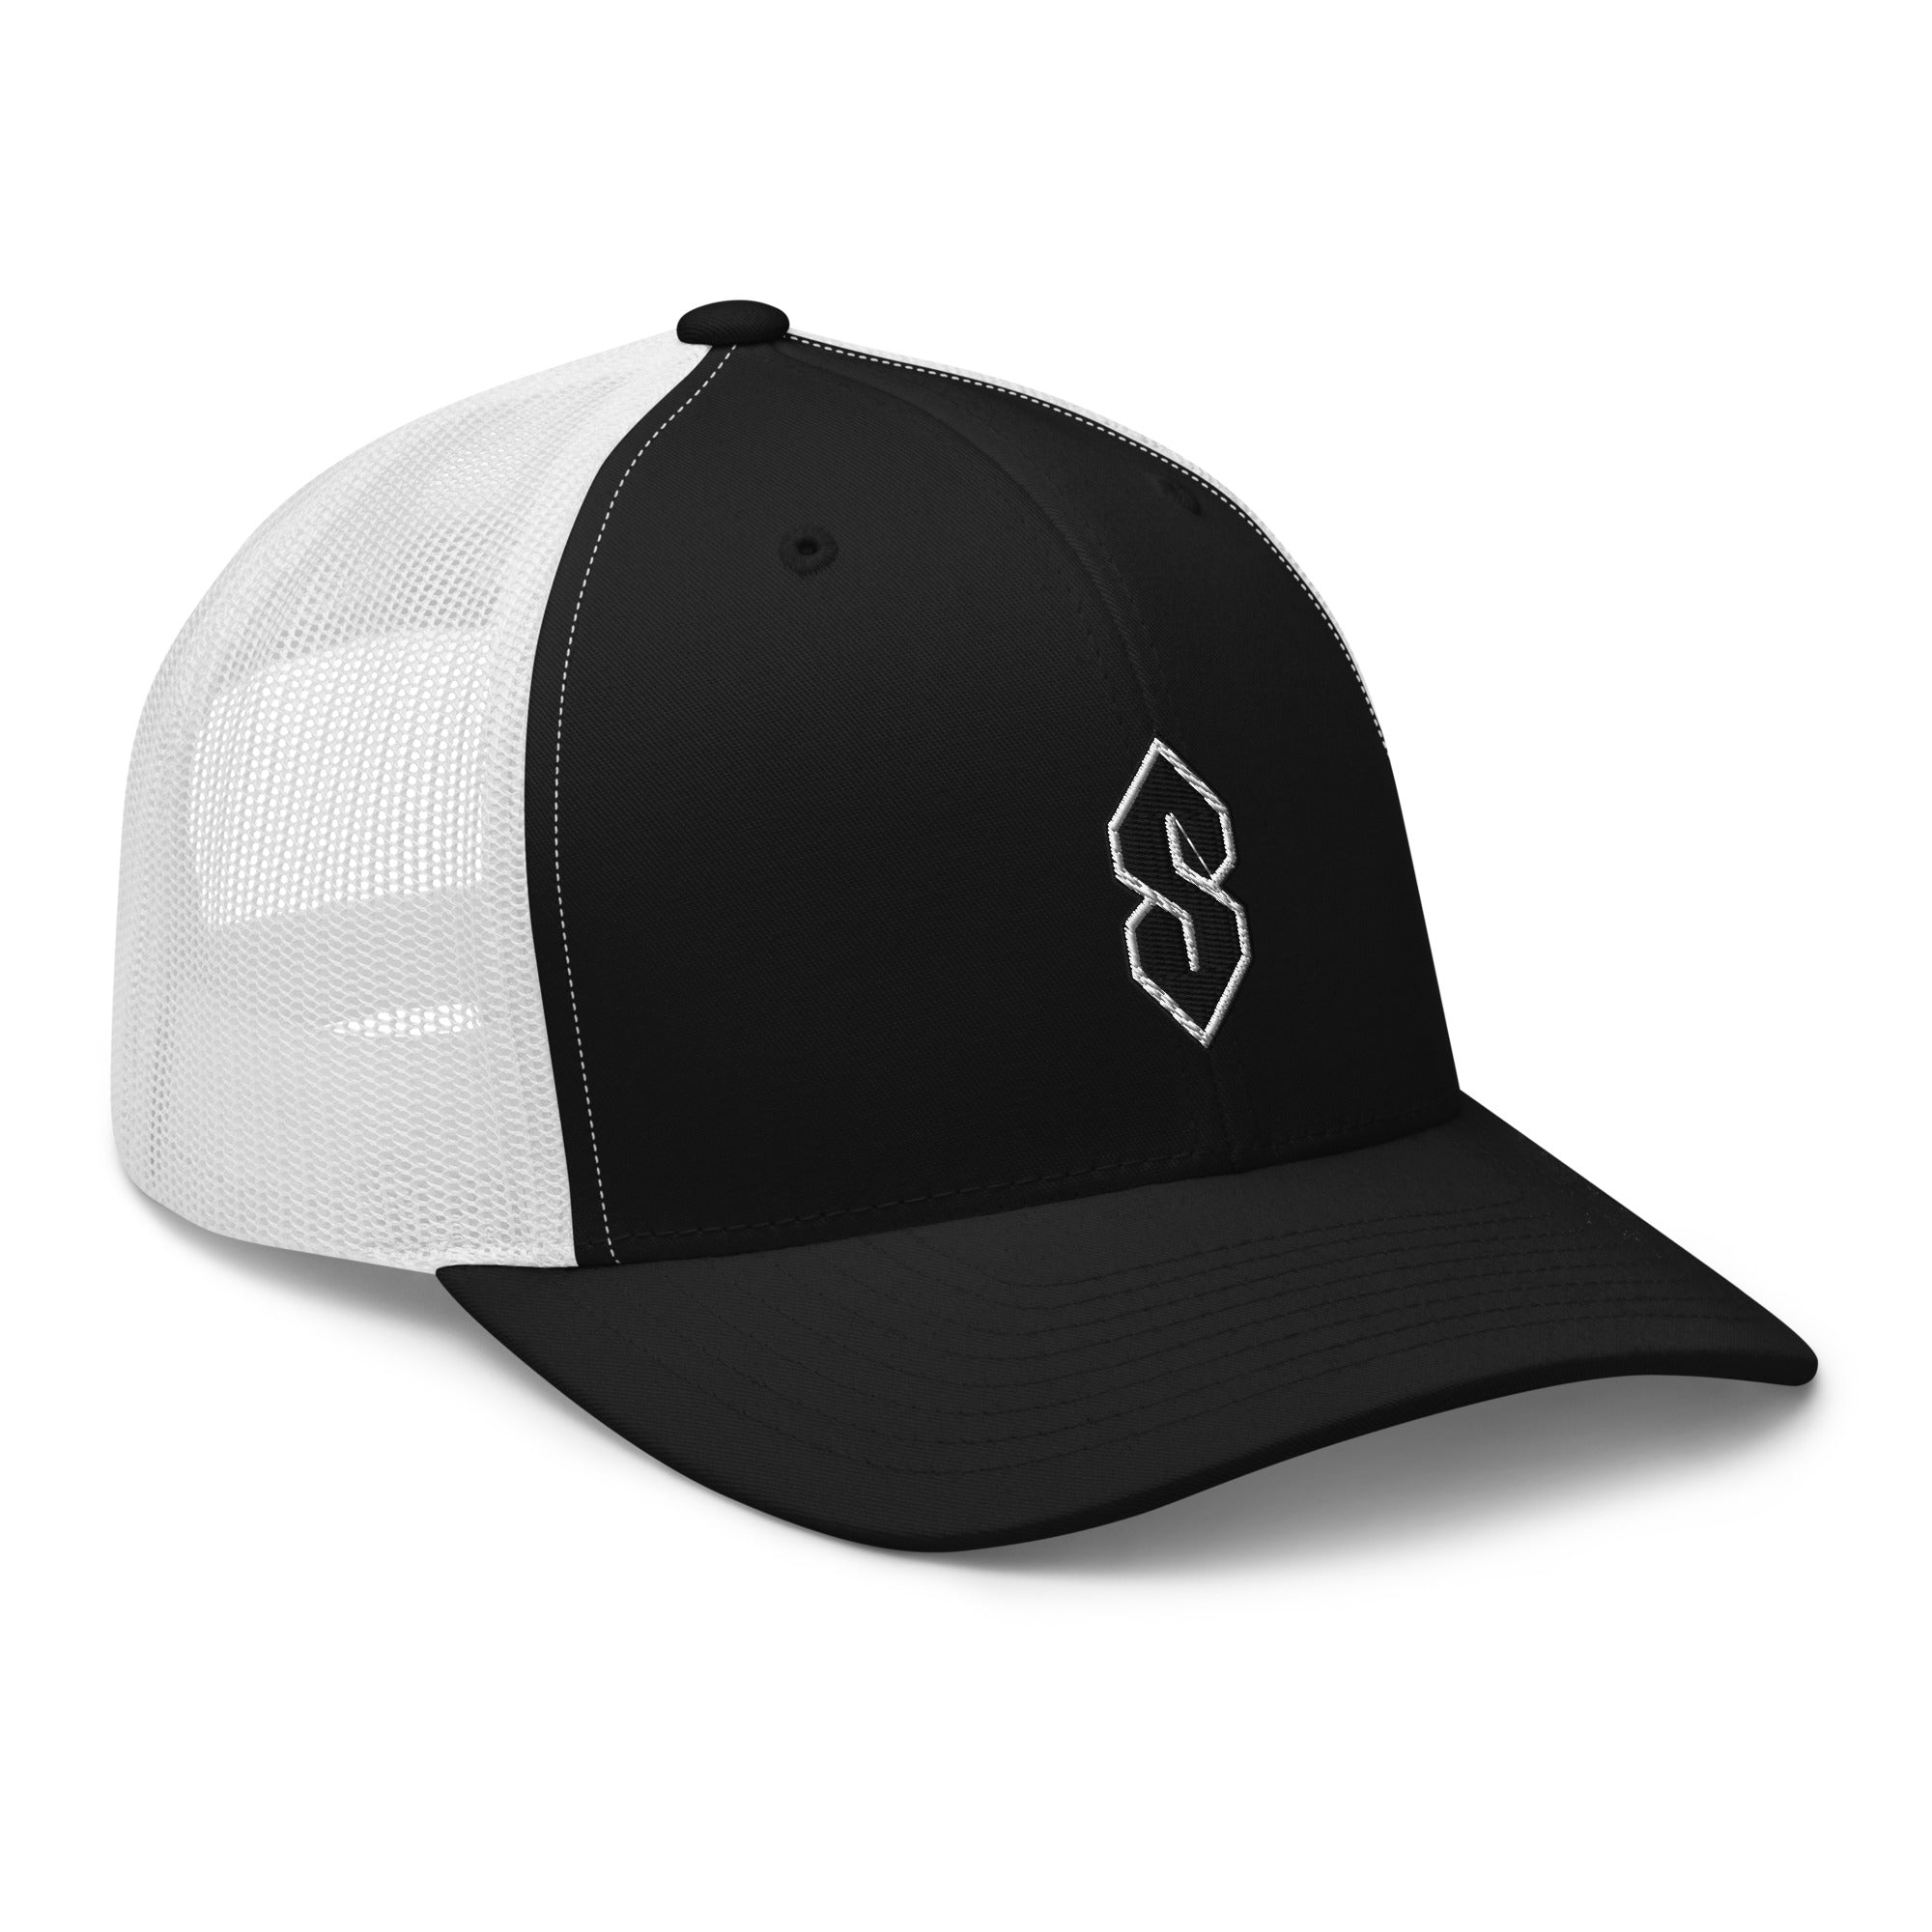 White Outline Cool S, Graffiti S, Middle School S Embroidered Trucker Cap Snapback Hat